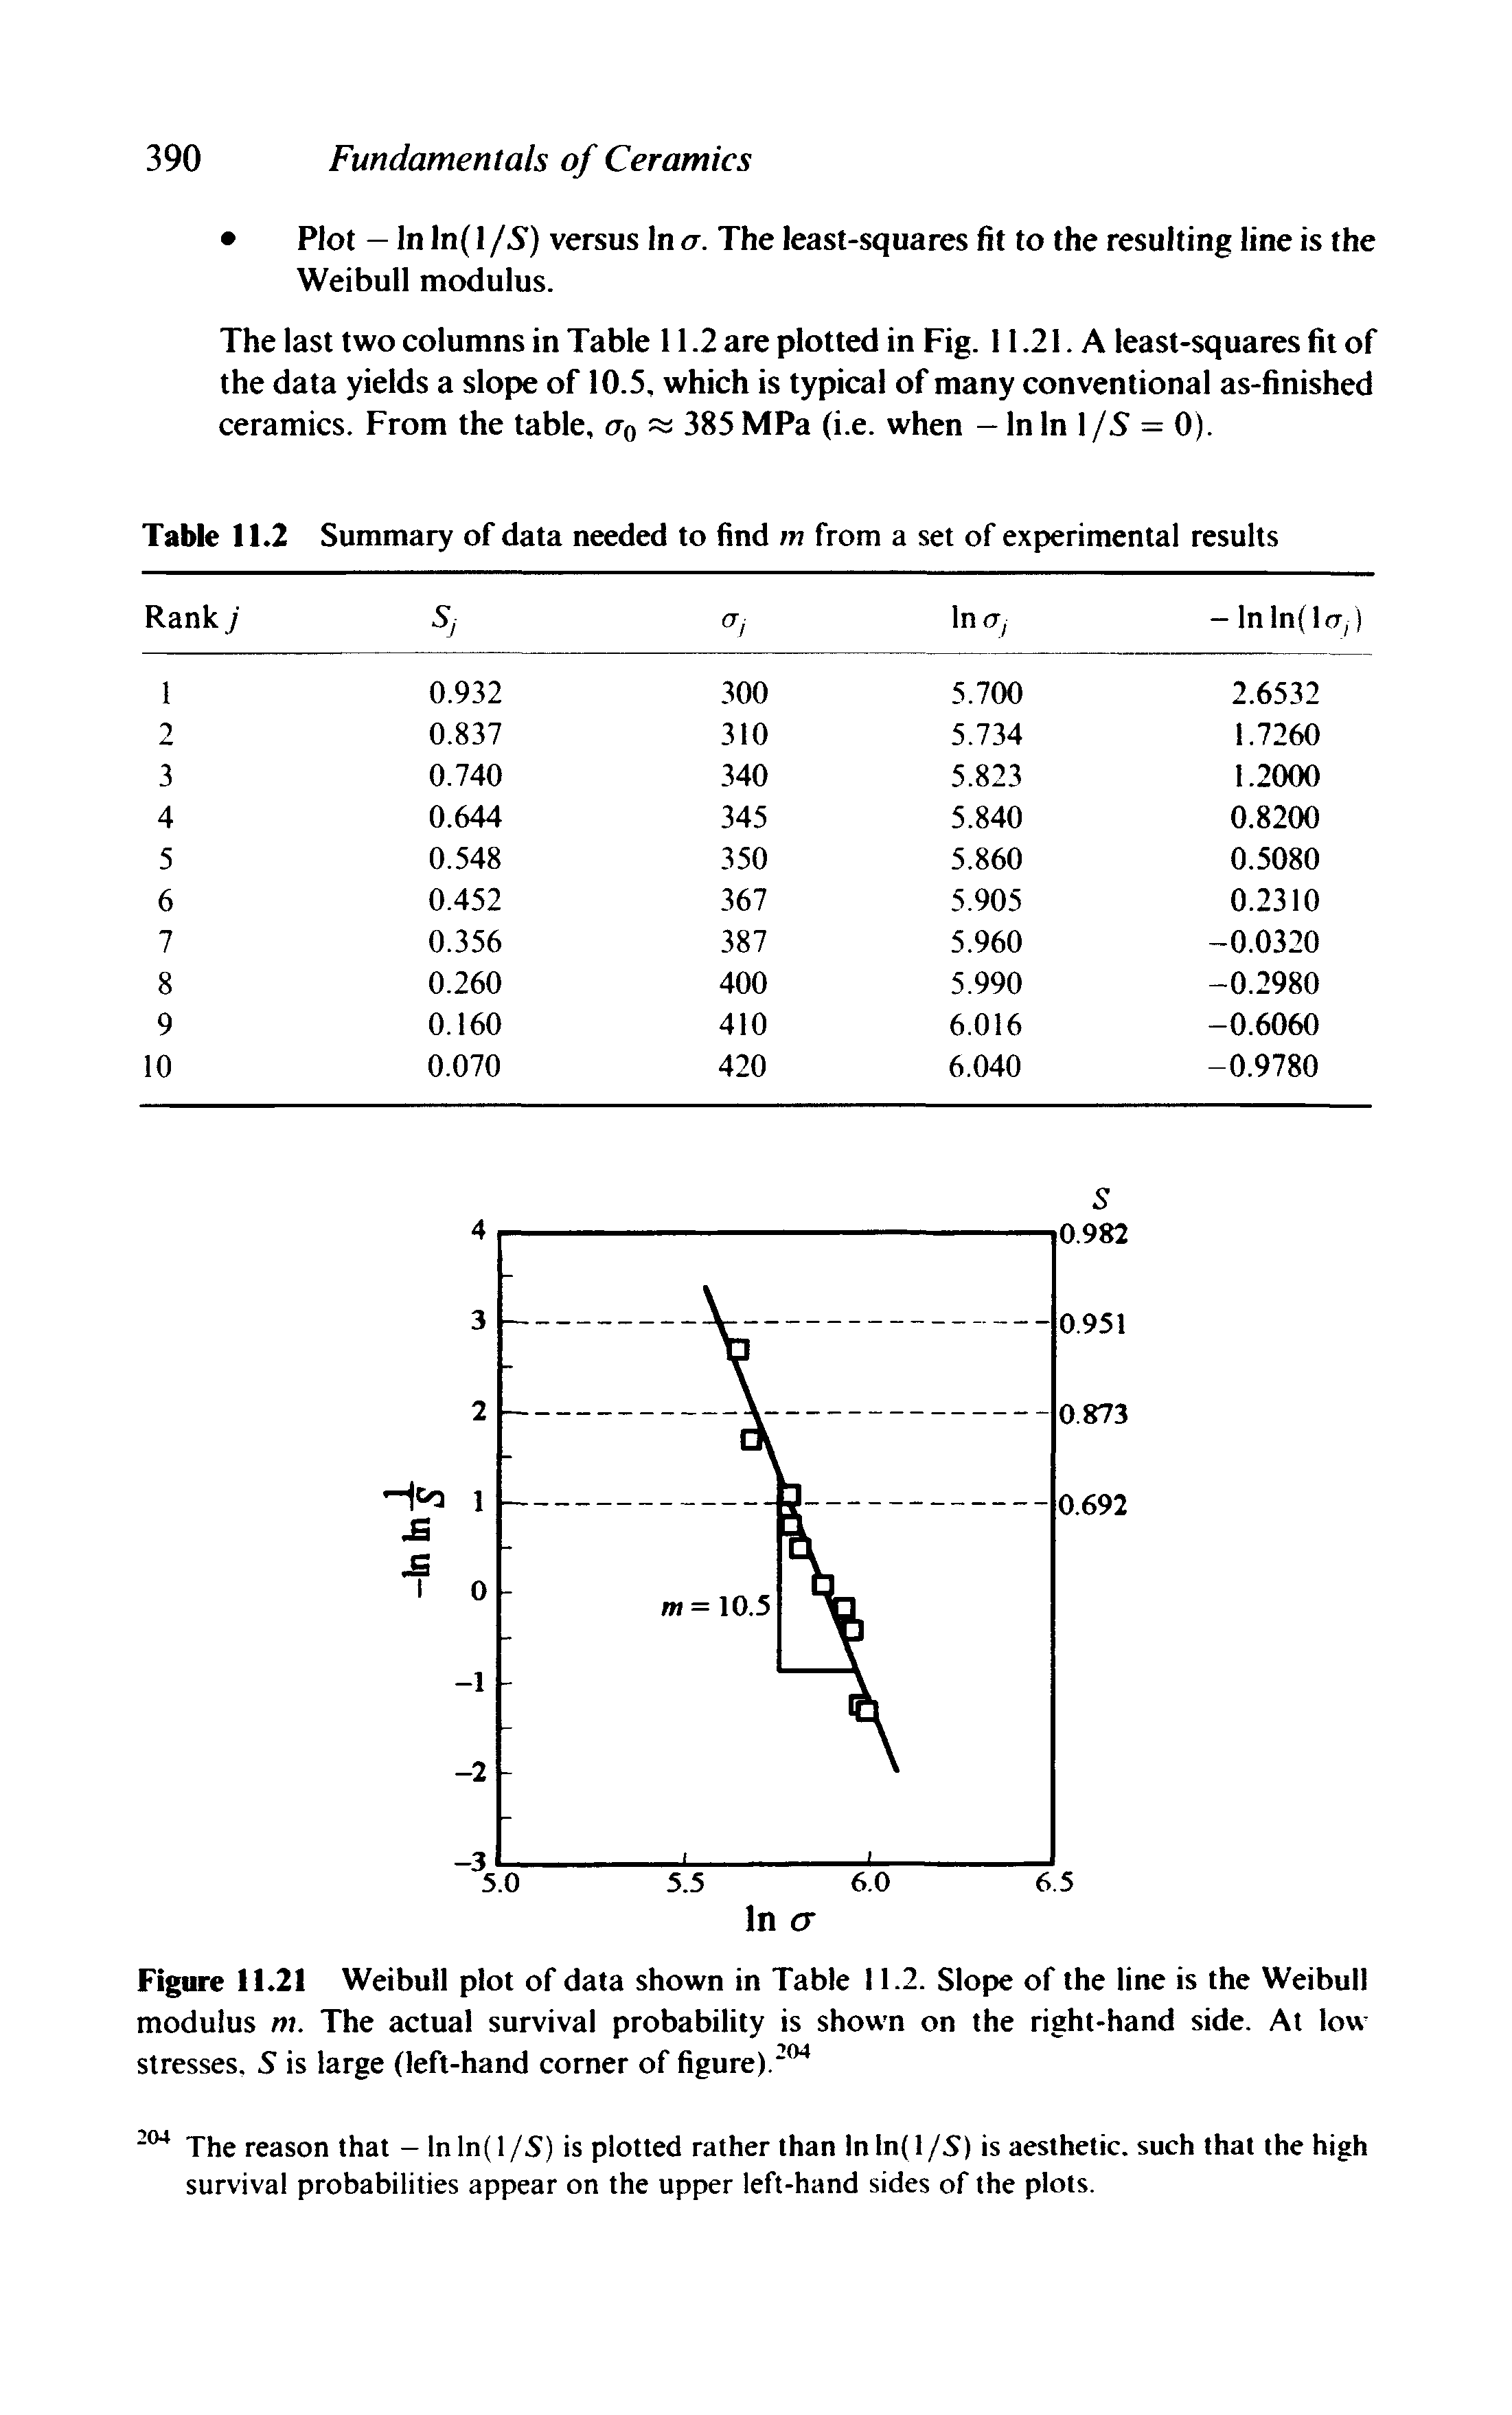 Figure 11.21 Weibull plot of data shown in Table 11.2. Slope of the line is the Weibull modulus m. The actual survival probability is shown on the right-hand side. At low stresses, S is large (left-hand corner of figure). ...